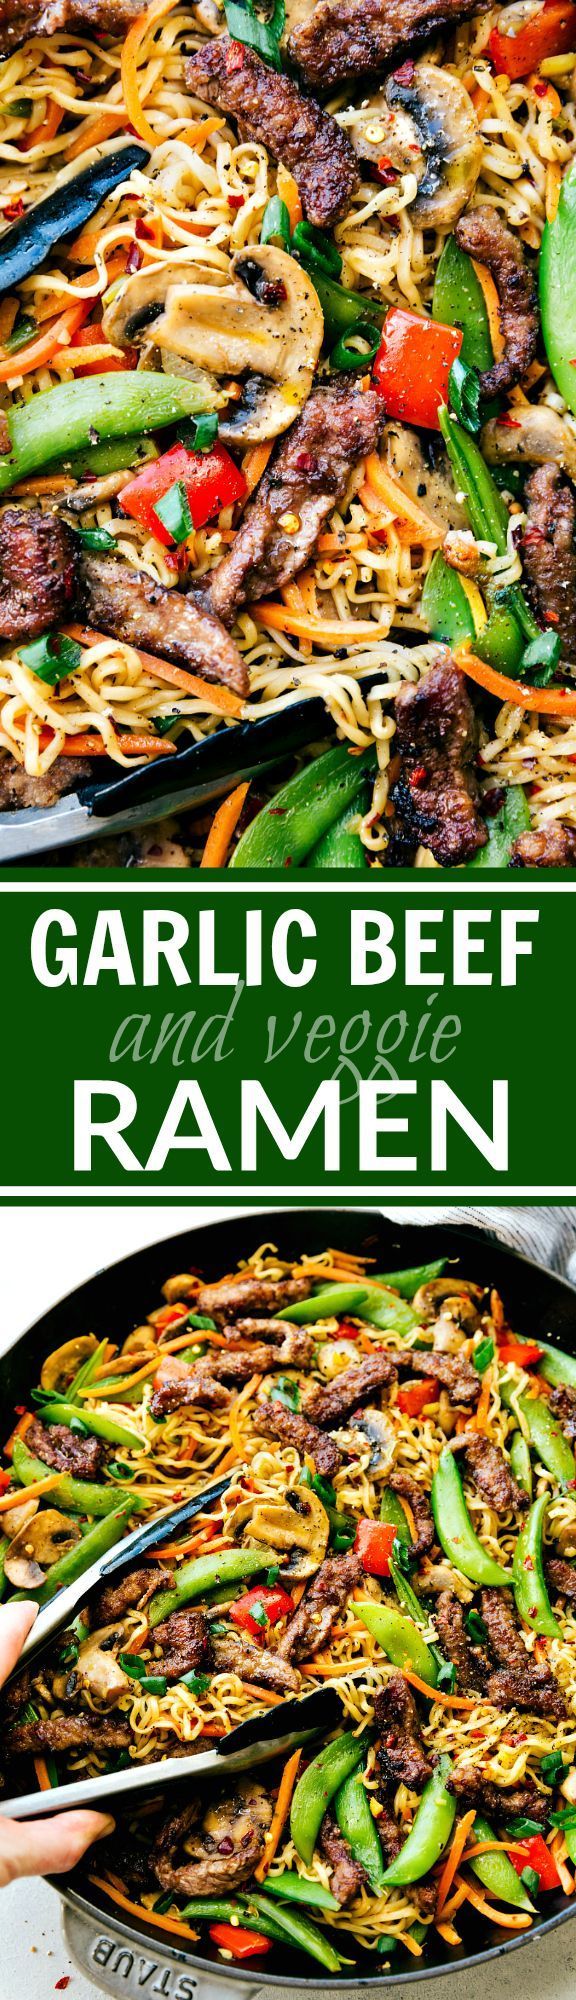 Garlic Beef and Veggie Ramen is an easy 30-minute dinner recipe that is so much better than take-out! via chelseasmessyapro…